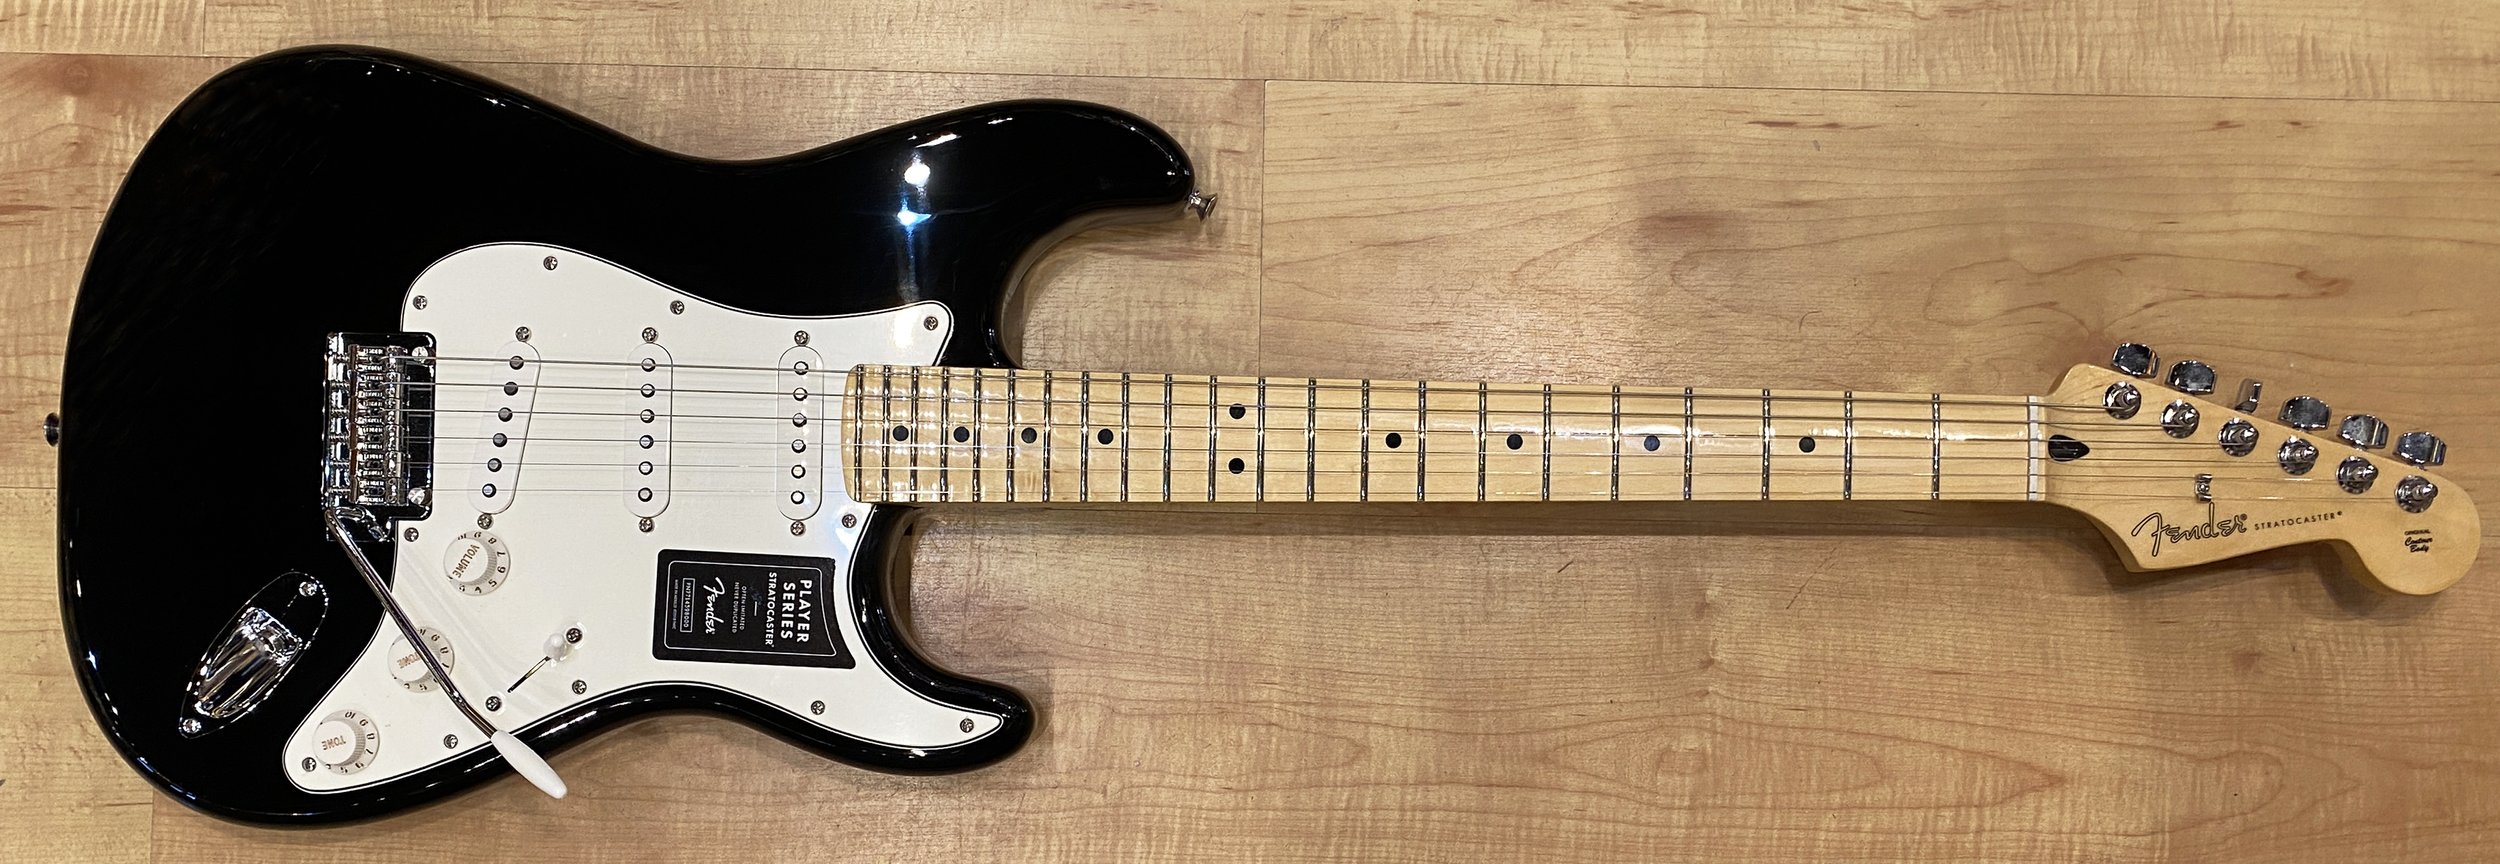 Fender Player Stratocaster Electric Guitar Tidepool — Andy Babiuk's